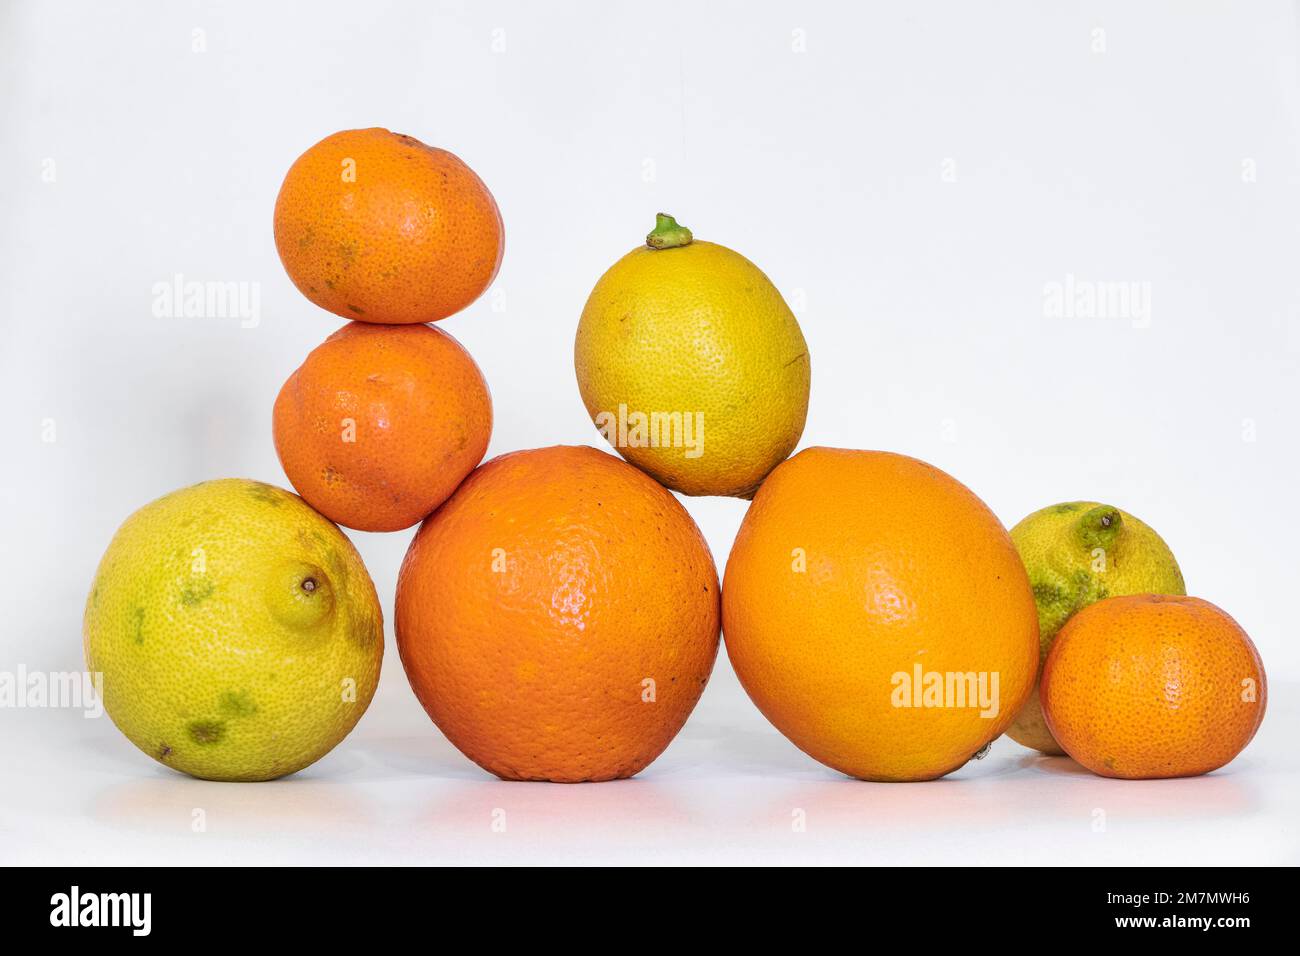 group of seasonal fruits composed of oranges, lemons and tangerines on a white background Stock Photo